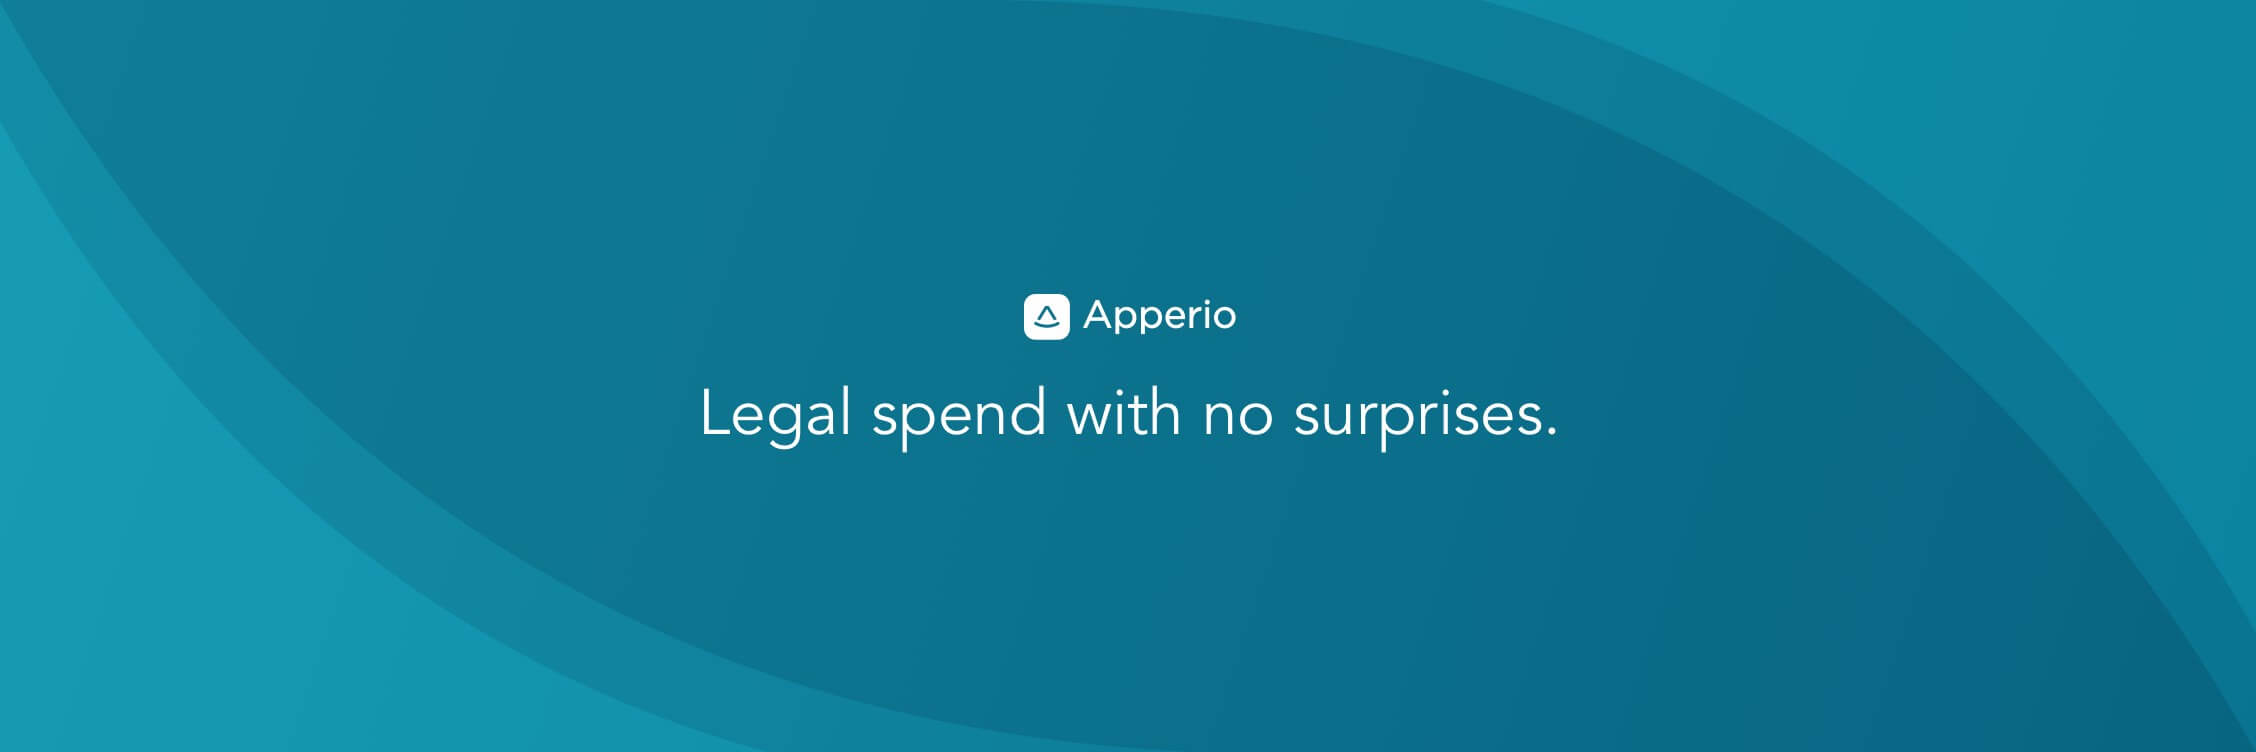 Apperio Launches Virtual Legal Expo for Private Equity, Hedge Funds and other Private Investment Organizations